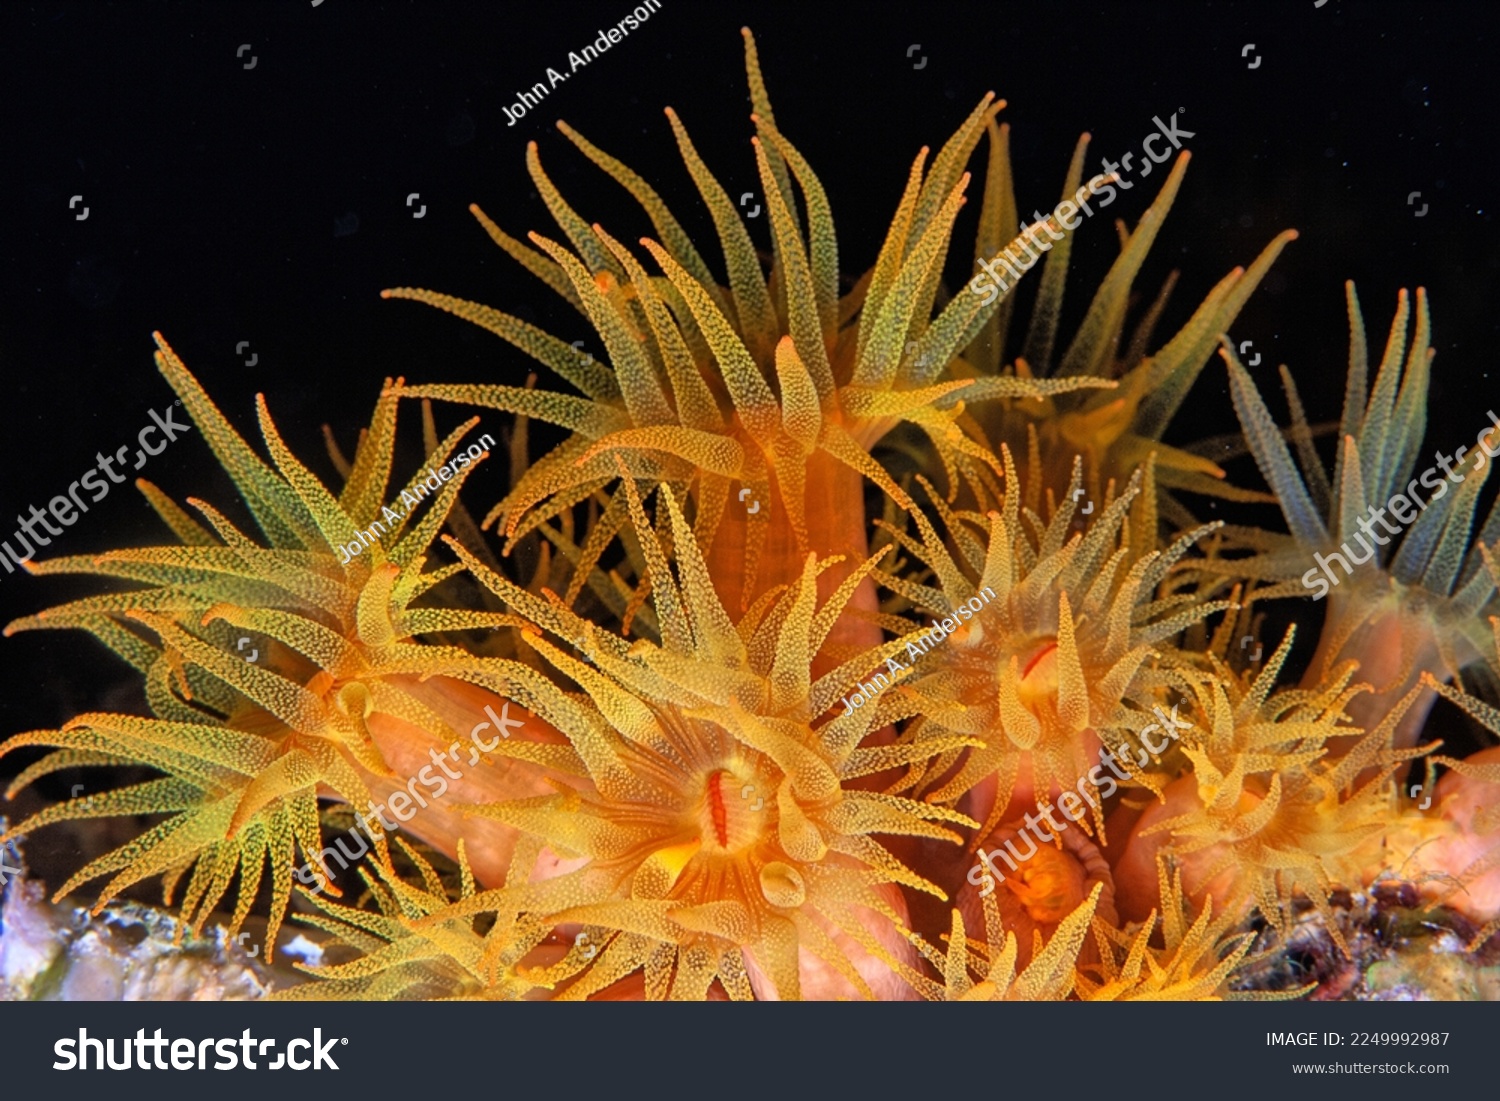 Orange cup coral,Tubastraea coccinea,belongs to a group of corals known as large-polyp stony corals #2249992987